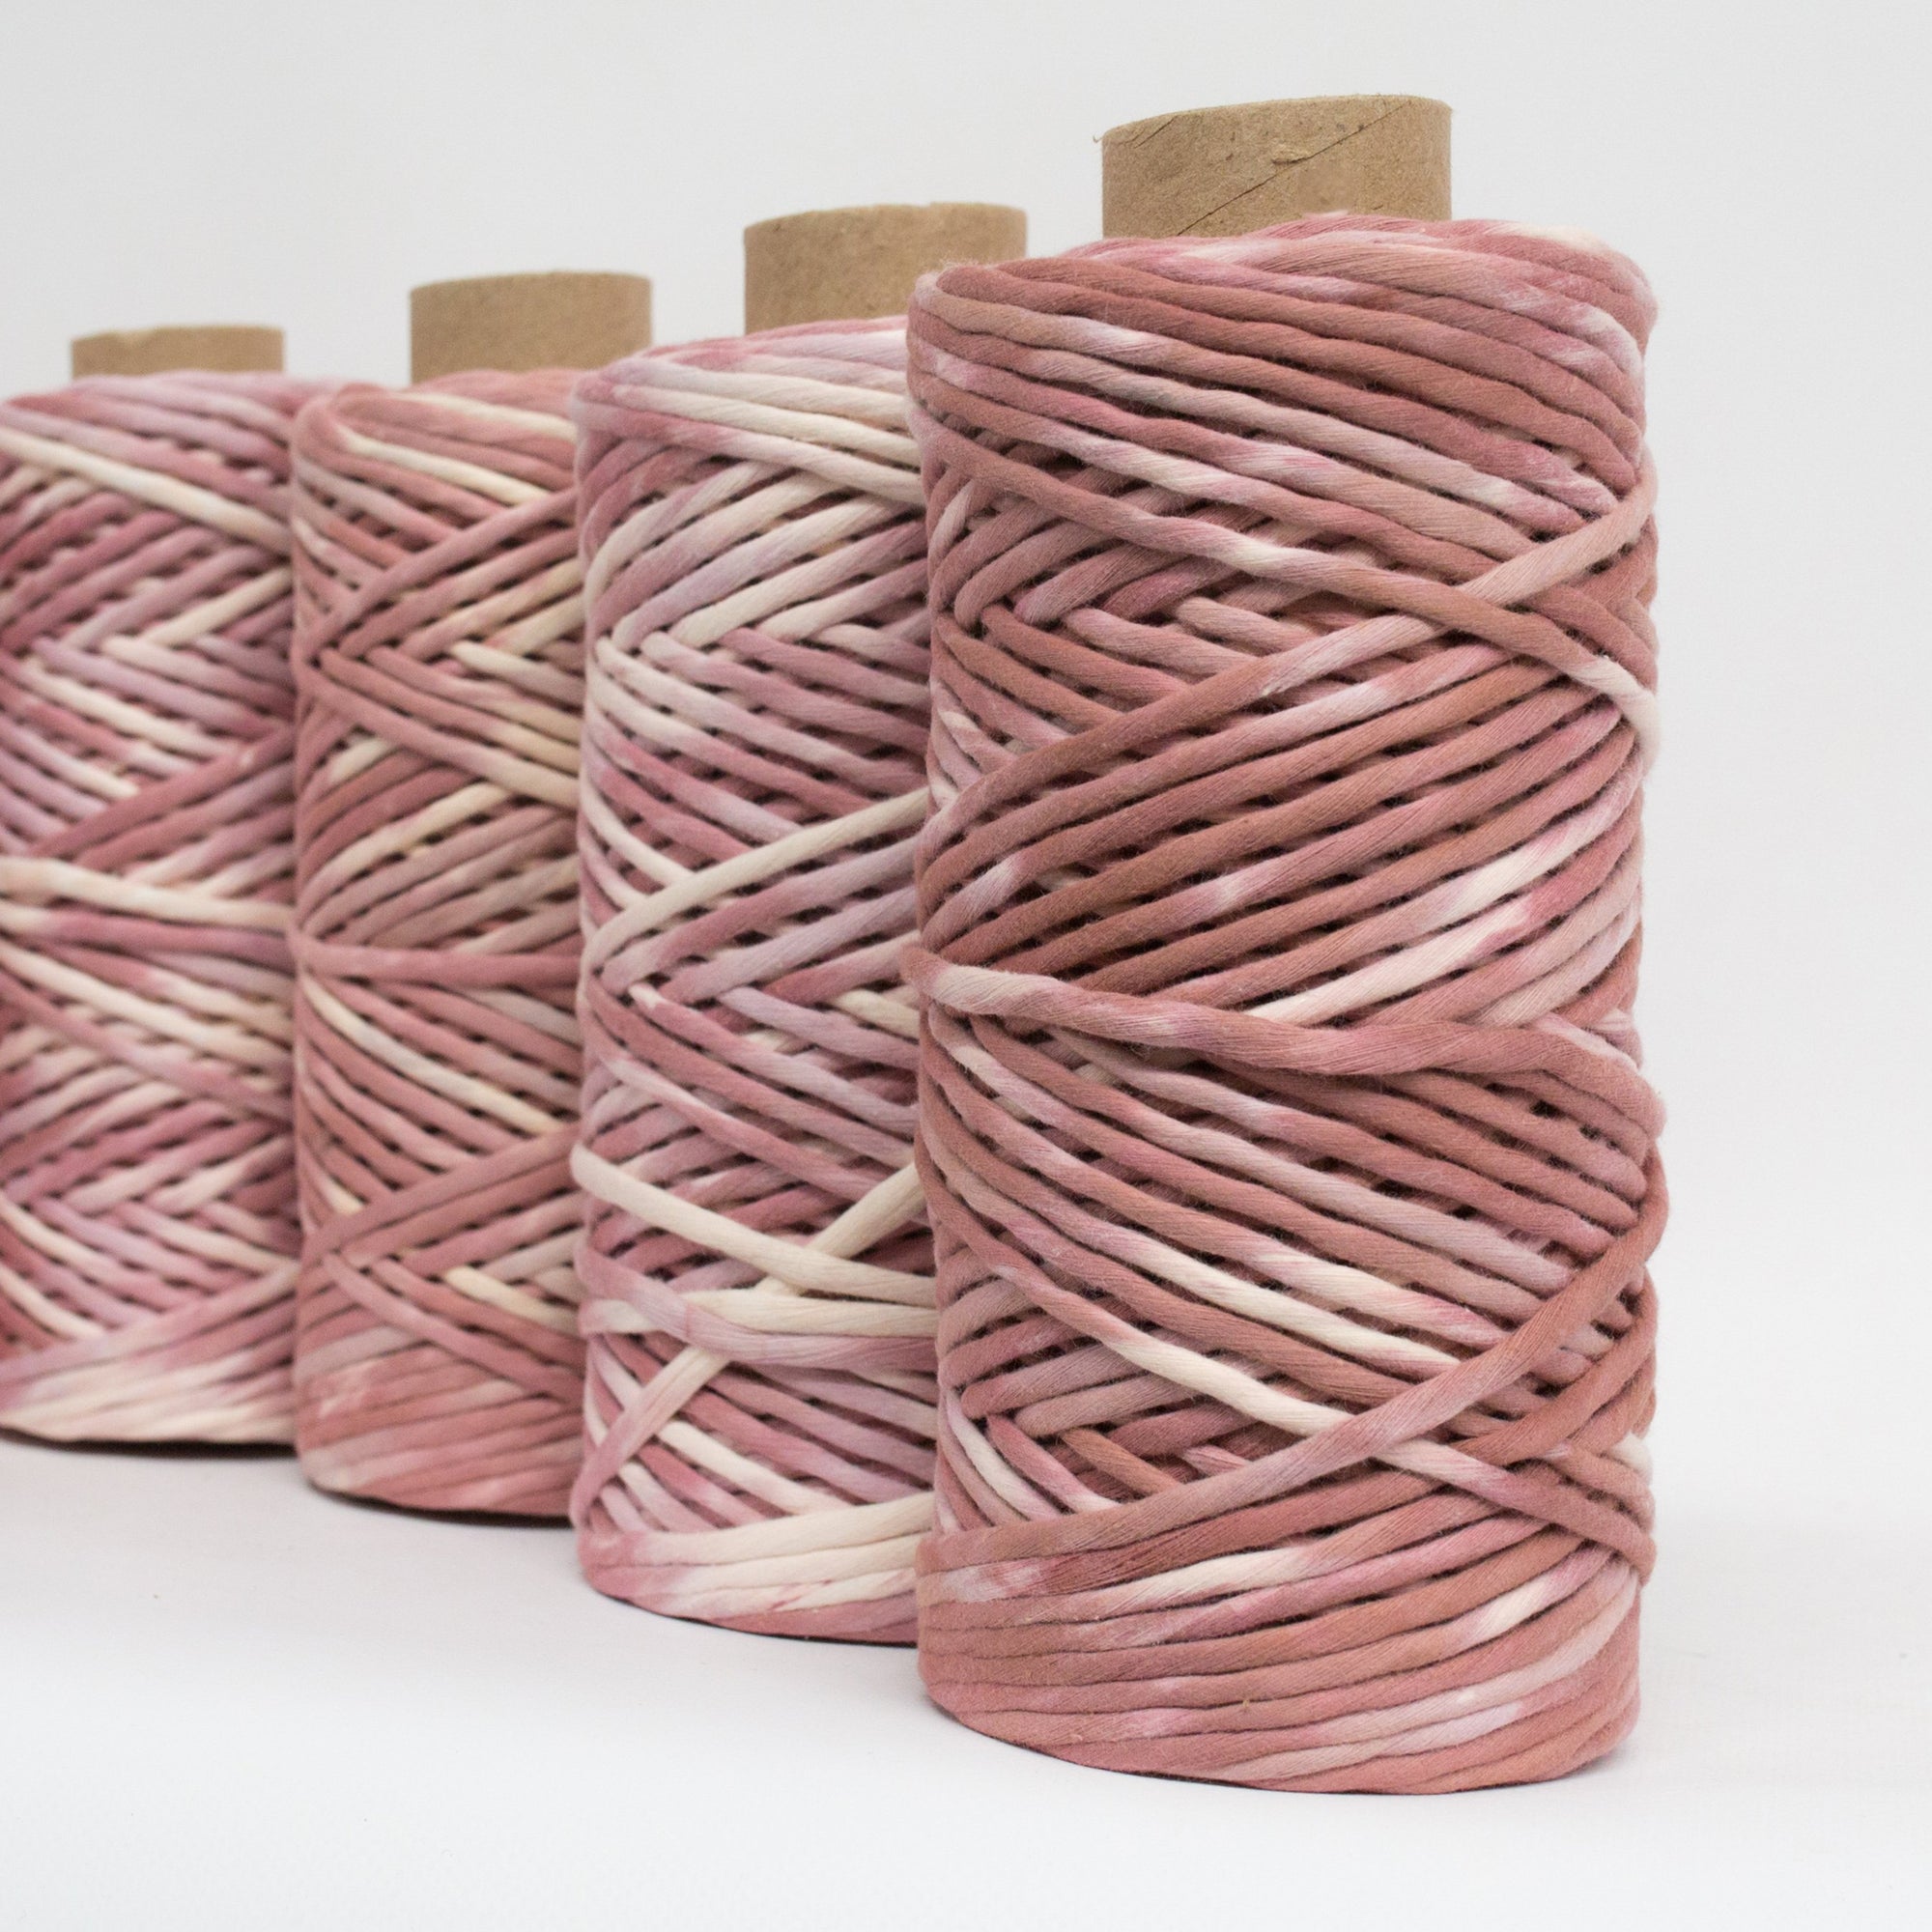 Waxed Cord for Micro-Macrame and DIY Craft - Buy Online - Mary Maker Studio  - Macrame & Weaving Supplies and Education.